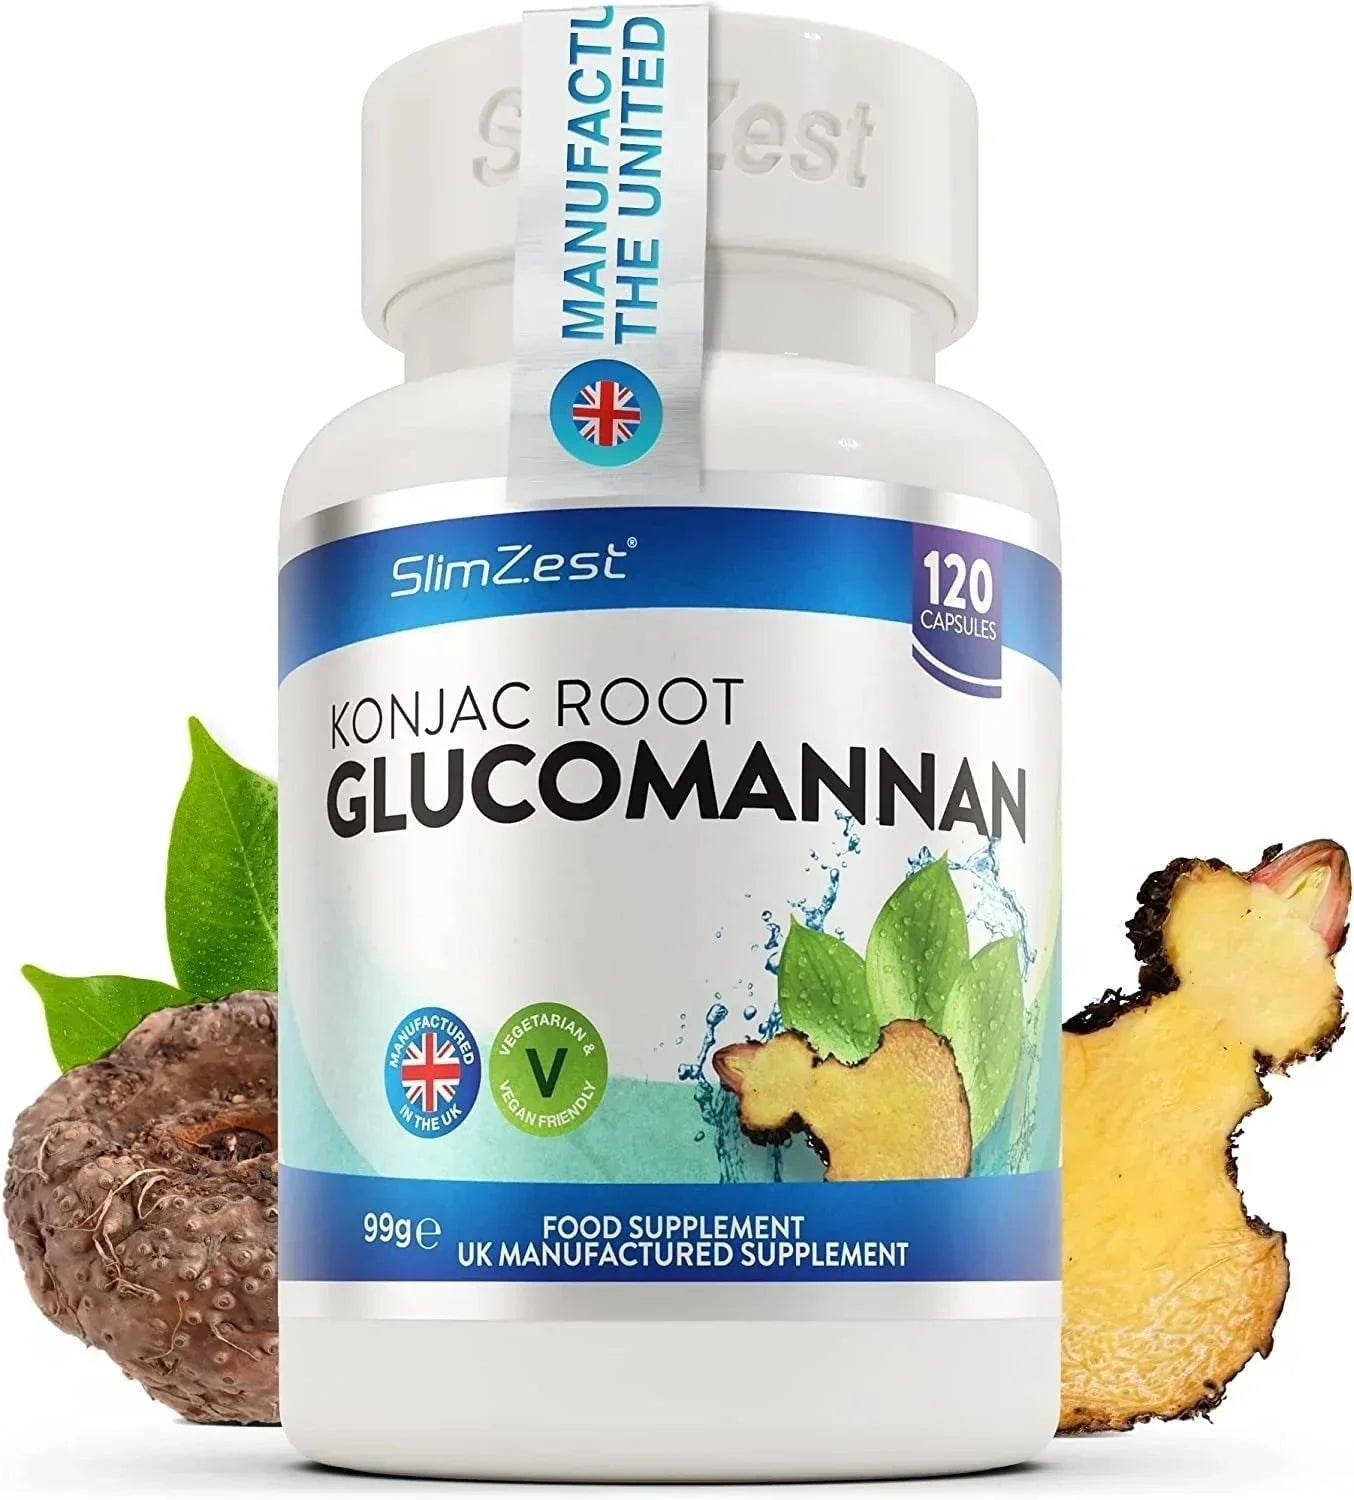 Glucomannan: Uses, Side Effects, Interactions